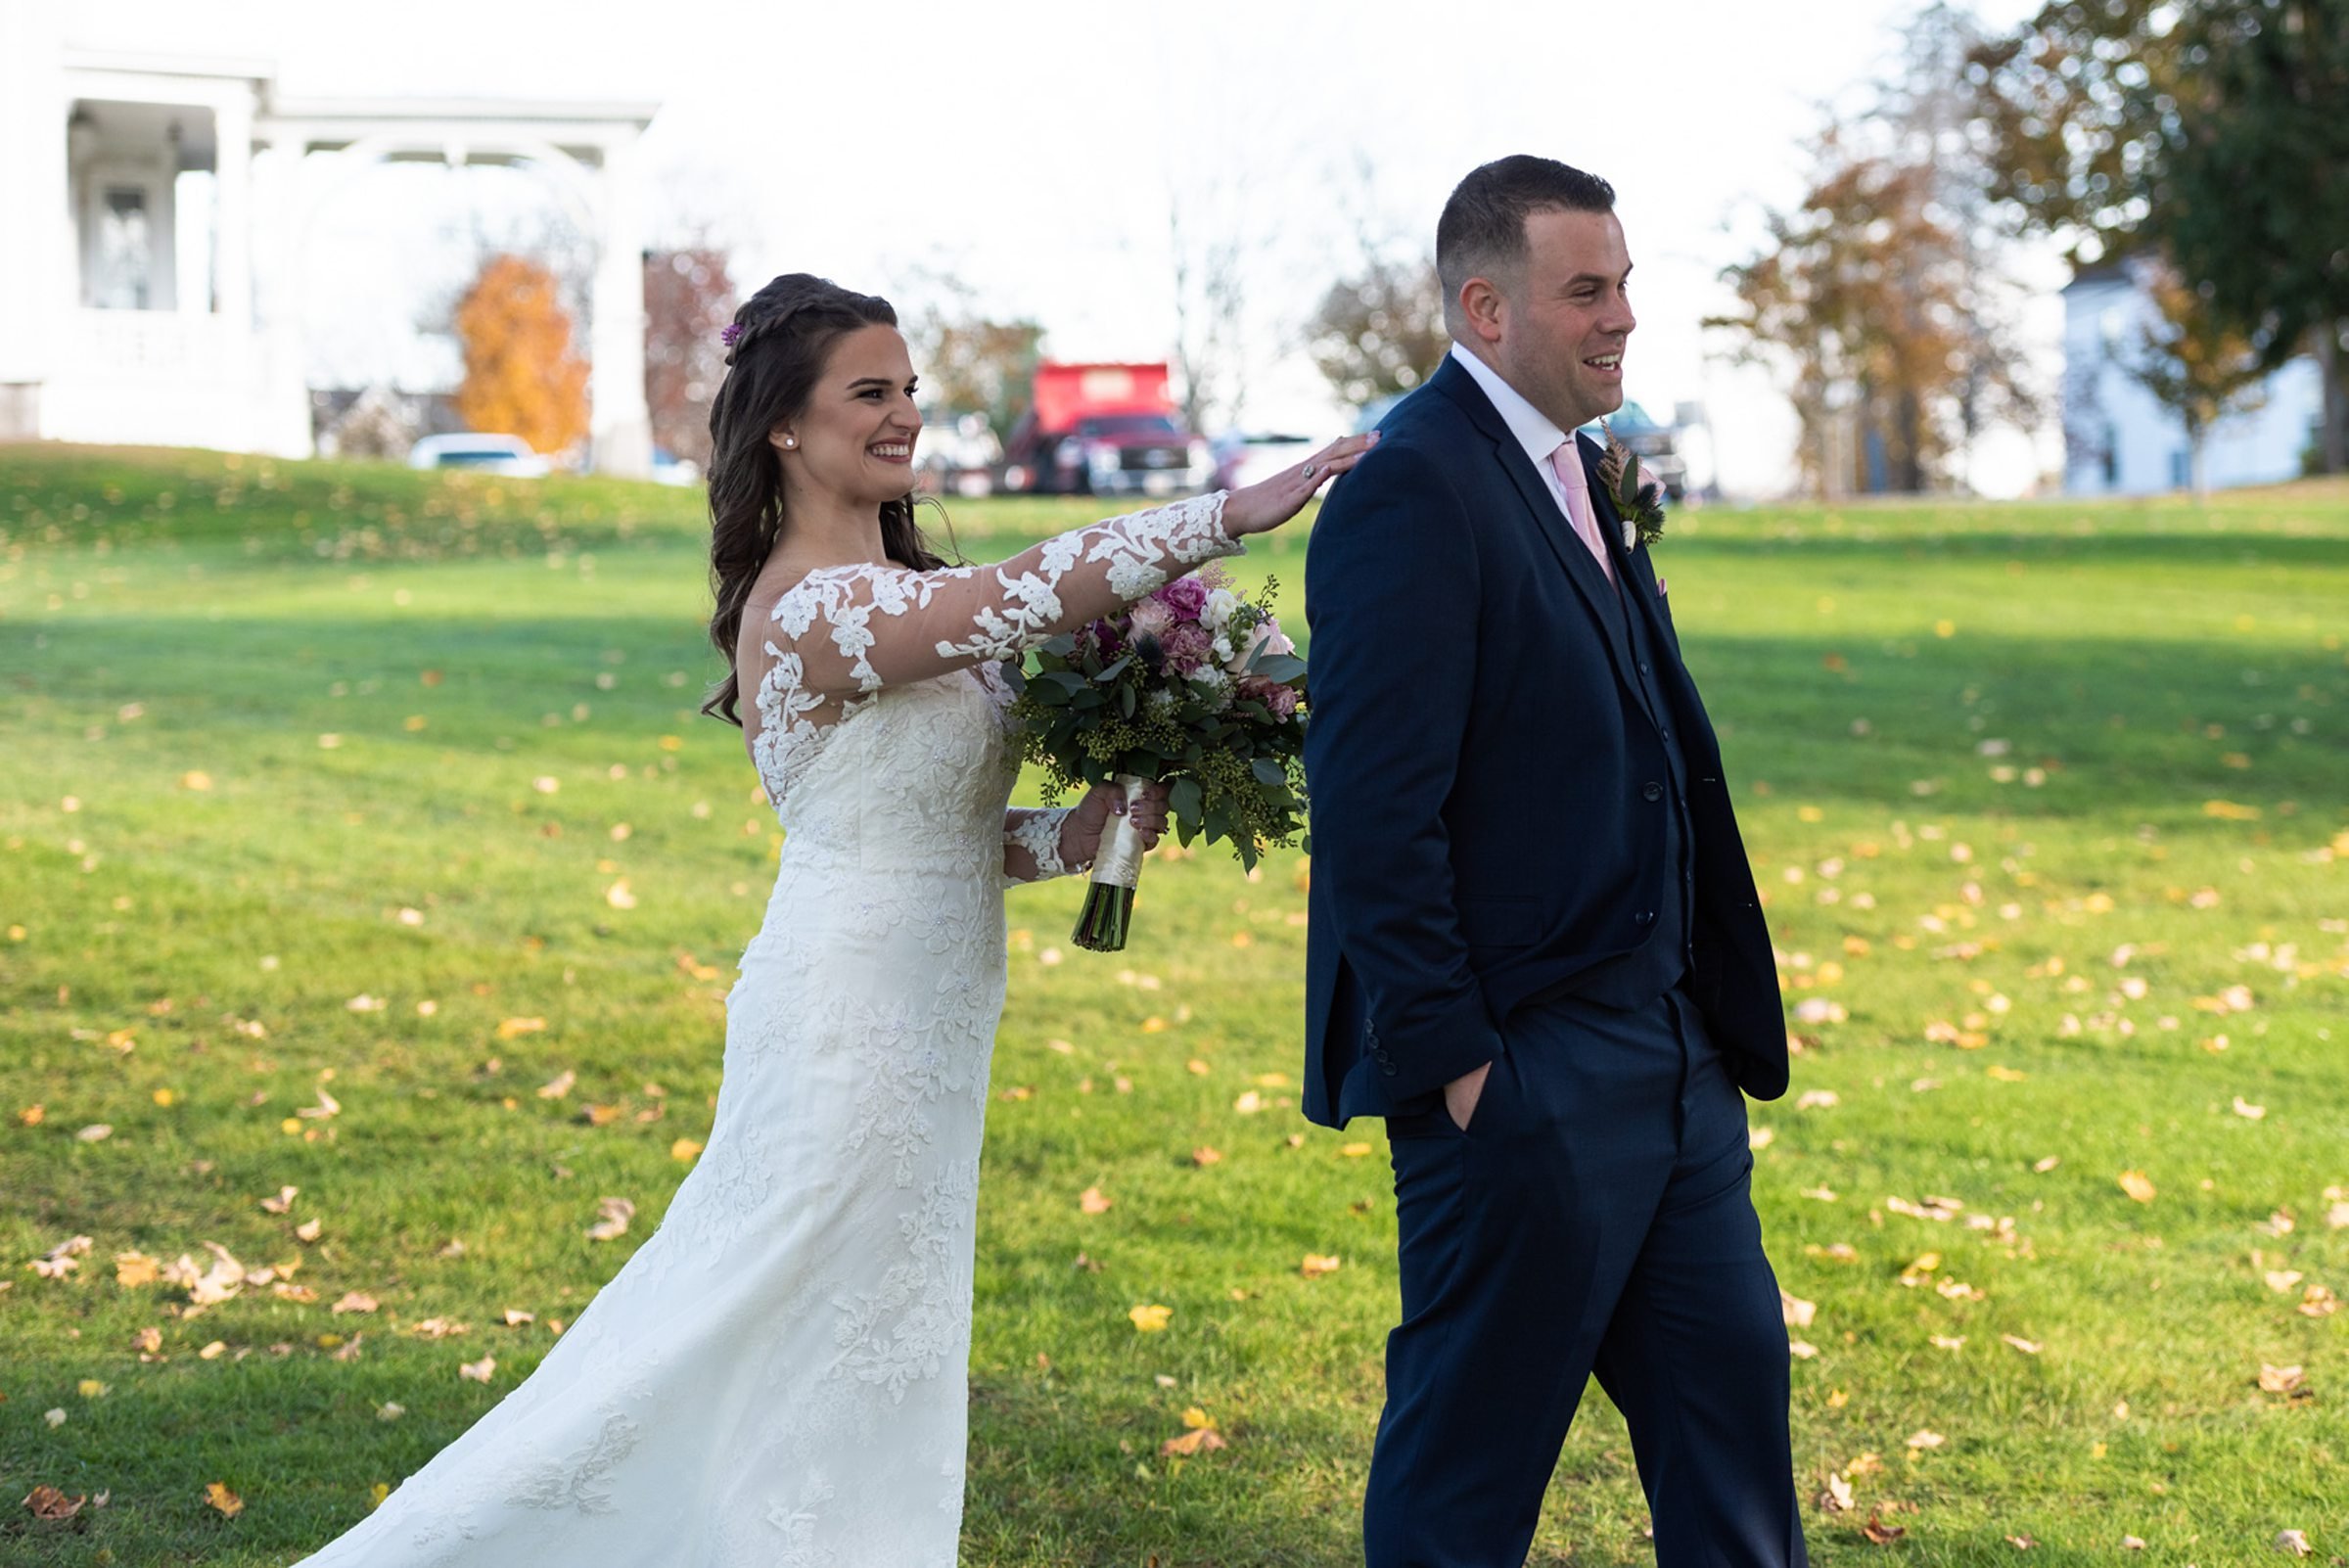 First Look or Not on Your Wedding Day: Advice from Boston Wedding Photographer